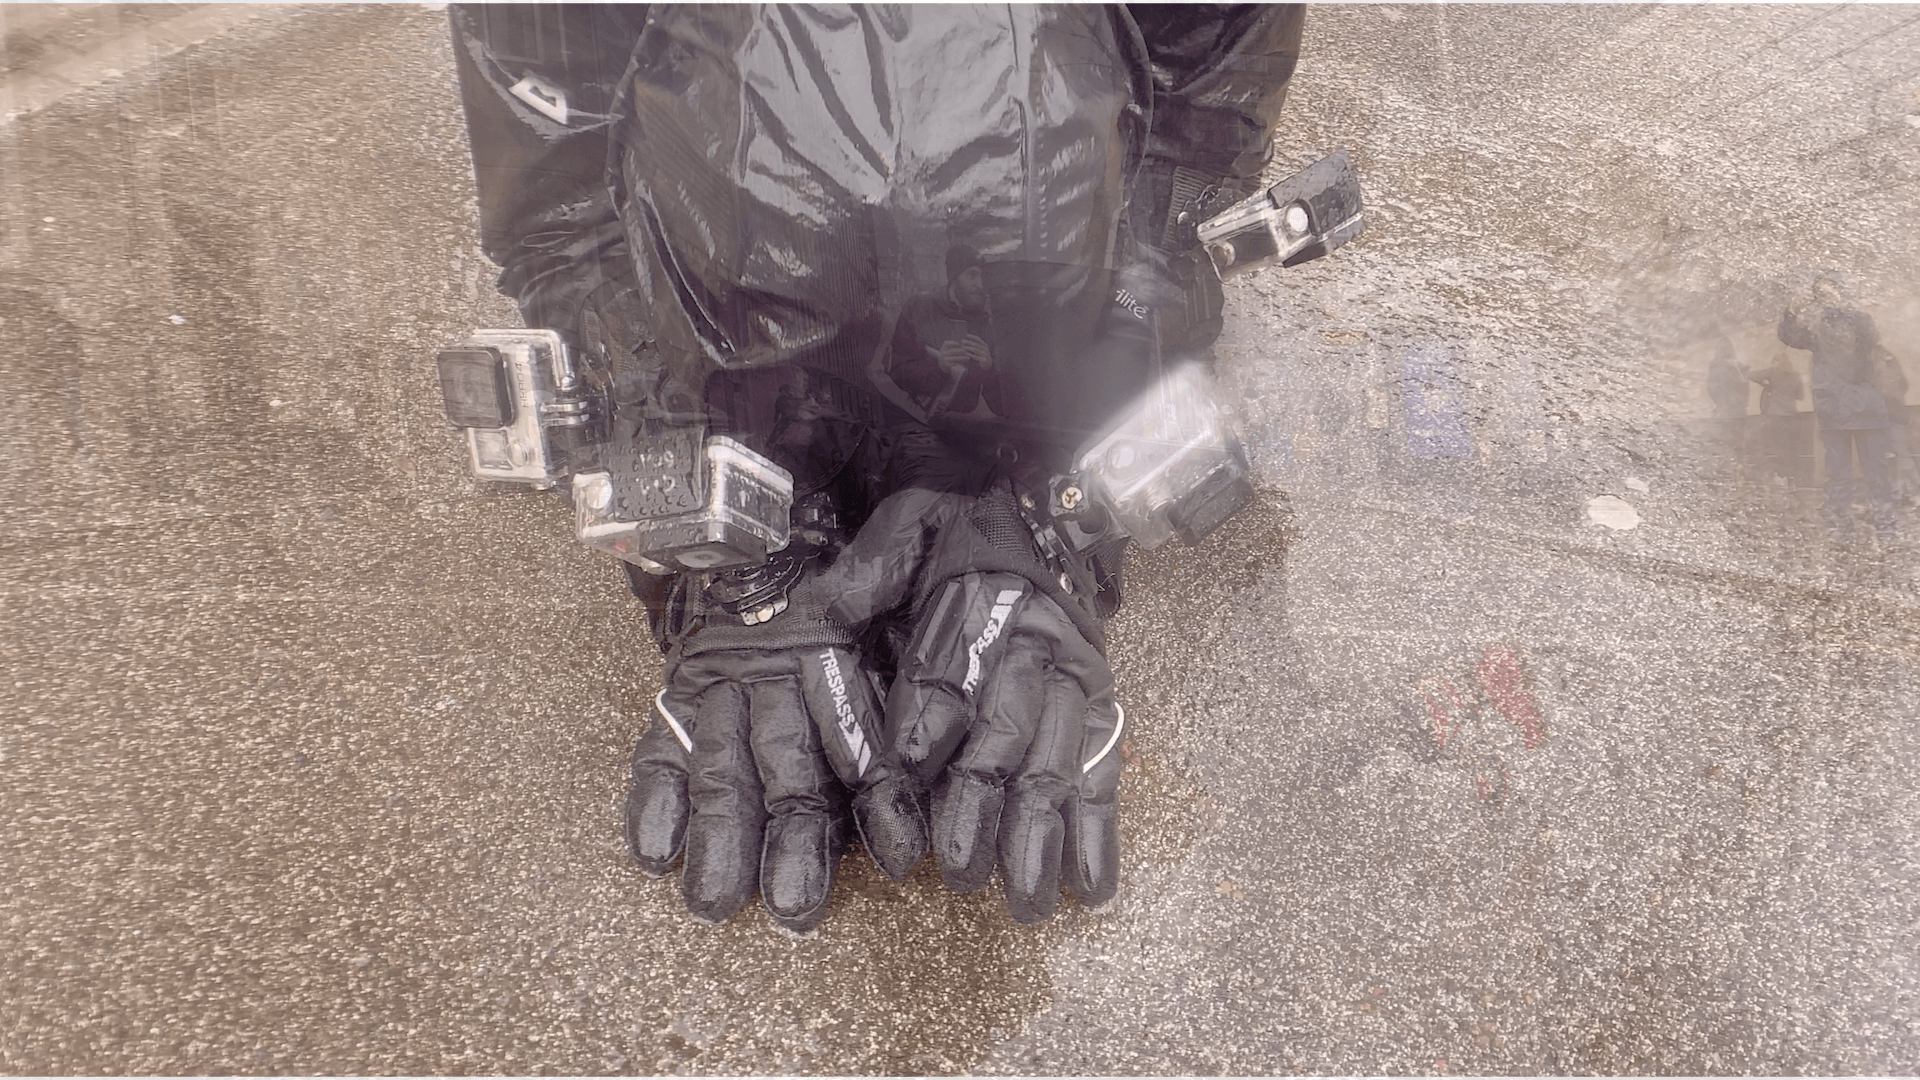 A woman has let her head drop onto her forearms, her black gloved hands are stretched out on a tarmac surface. The gloves have the brand logo ‘Trespass' written on them. Four GoPro cameras are attached to her hands and wrists. The image has been overlaid by another image, so on her wet black hood you can see an image of a man holding a phone camera and the plant pot and the tree trunk, there are also some very faint and so difficult to identify colours and shapes from the overlaid image in the wet pavement.